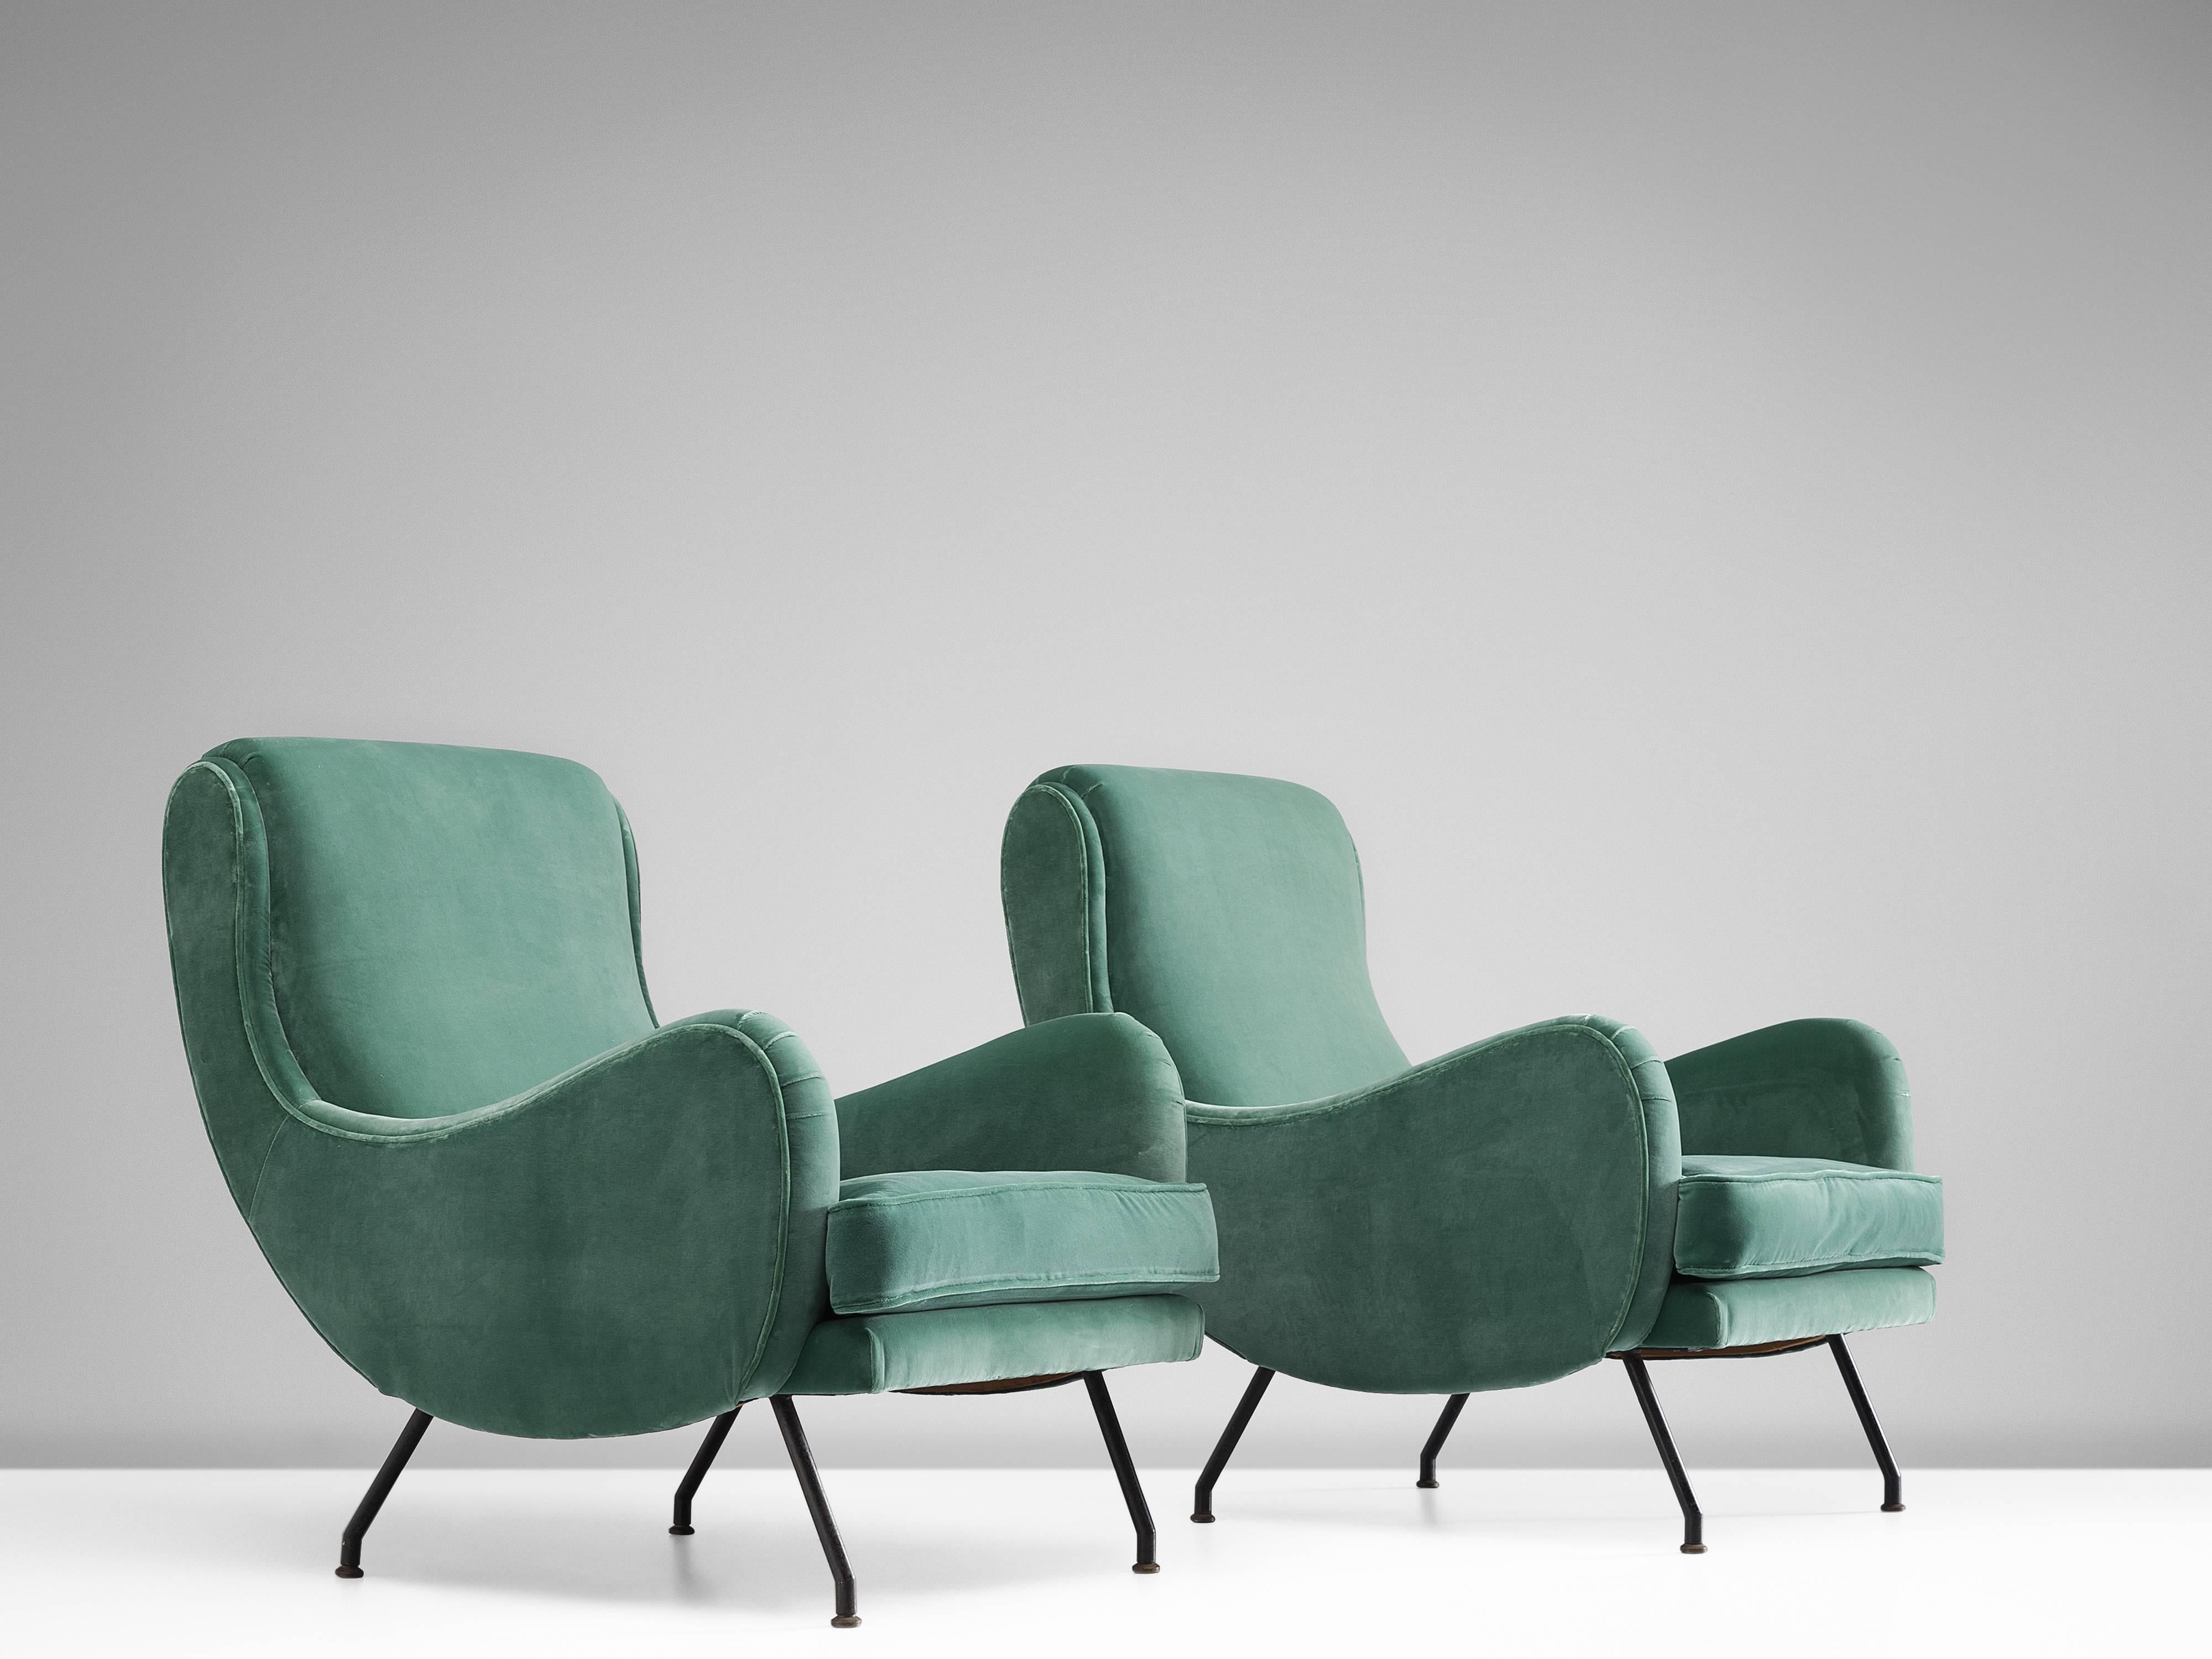 Pair of easy chairs, green velvet and metal, France, 1950s.

These well-made armchairs show a great deal of craftsmanship. The chair features a large, tilted comfortable seat with wing like armrests and a tilted back for comfort. The green soft